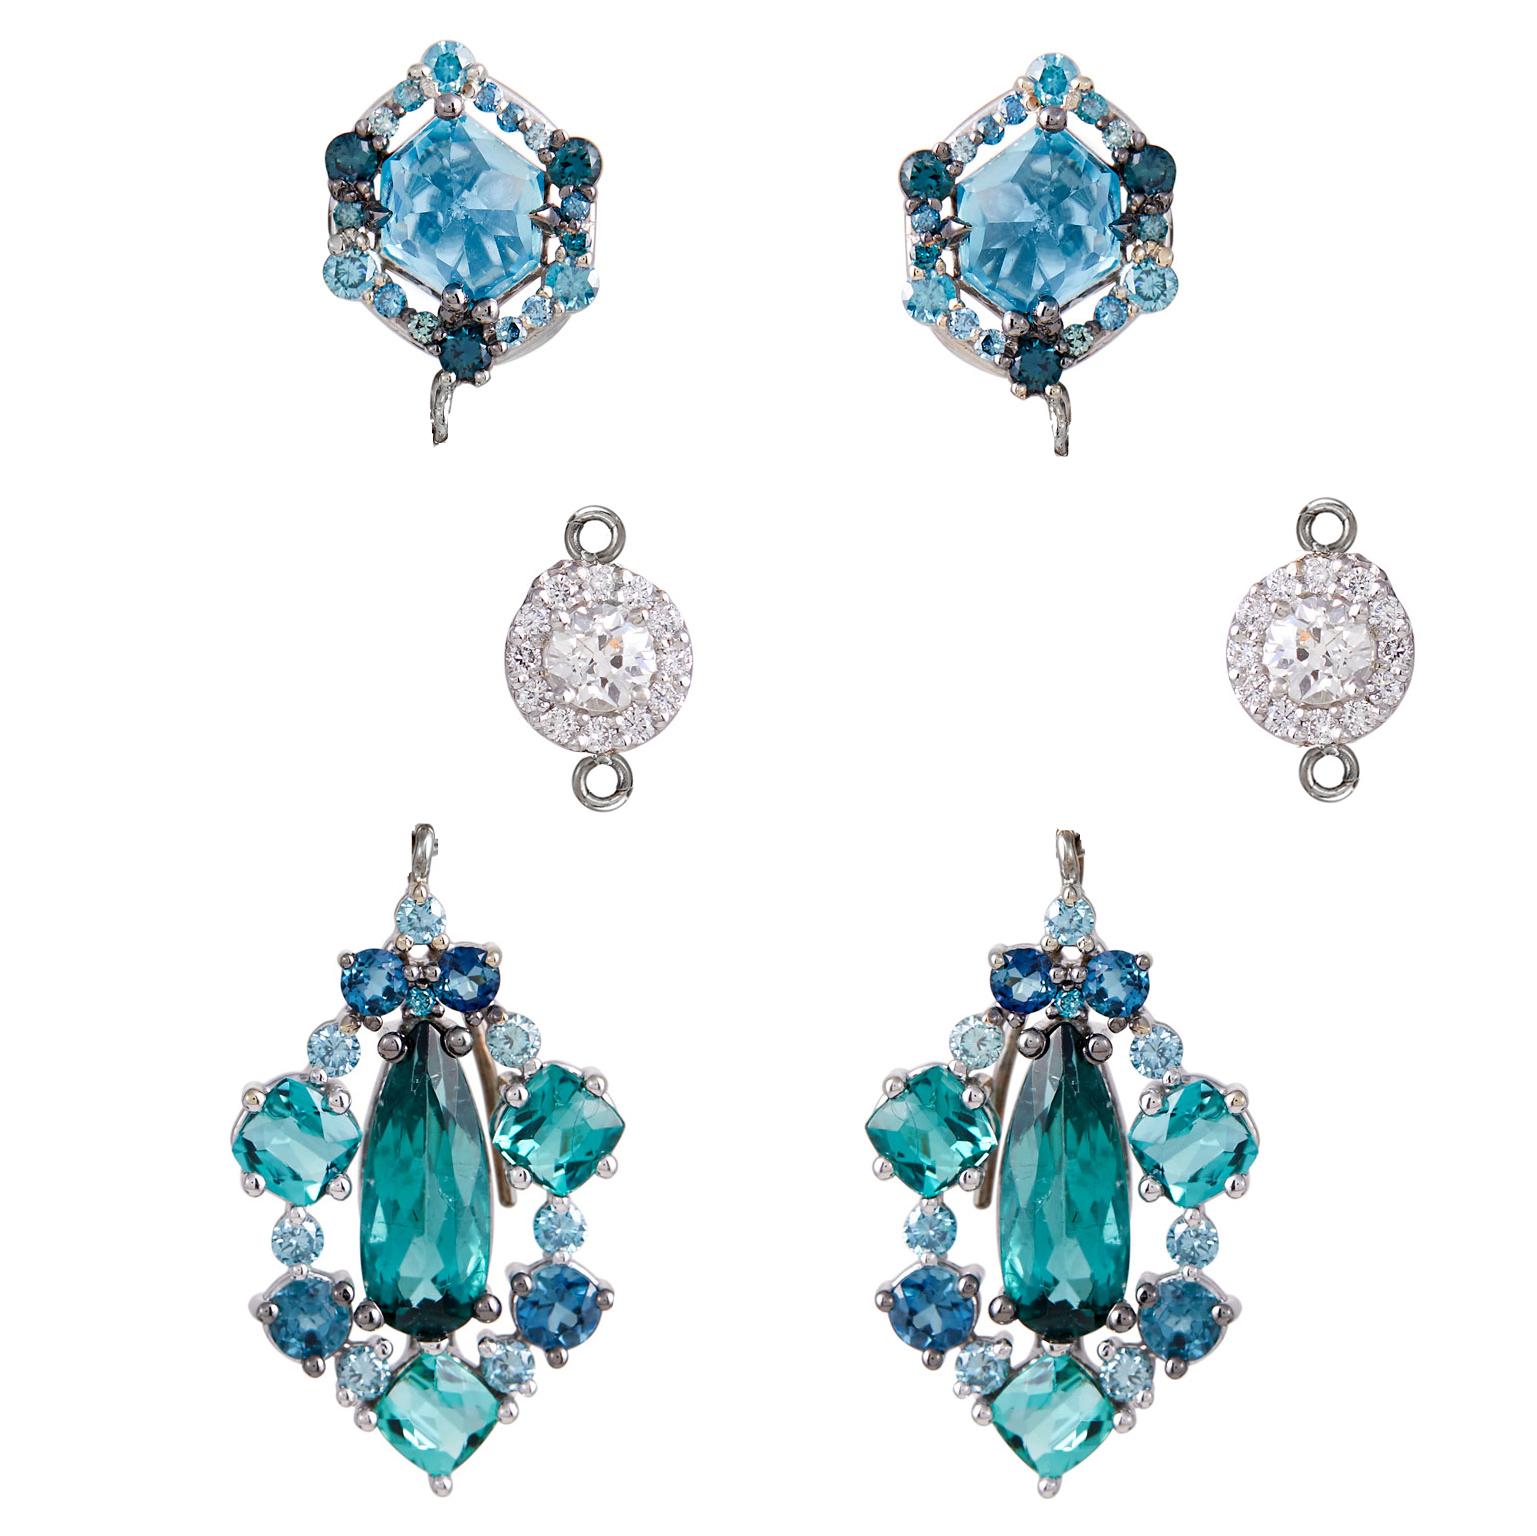 Convertible tourmaline, aquamarine, diamond, and natural blue zircon earrings designed in 18k white gold. These unique earrings have a glow of tropical water colors and are accented by fine white diamonds F-G color and VS1 clarity as well as